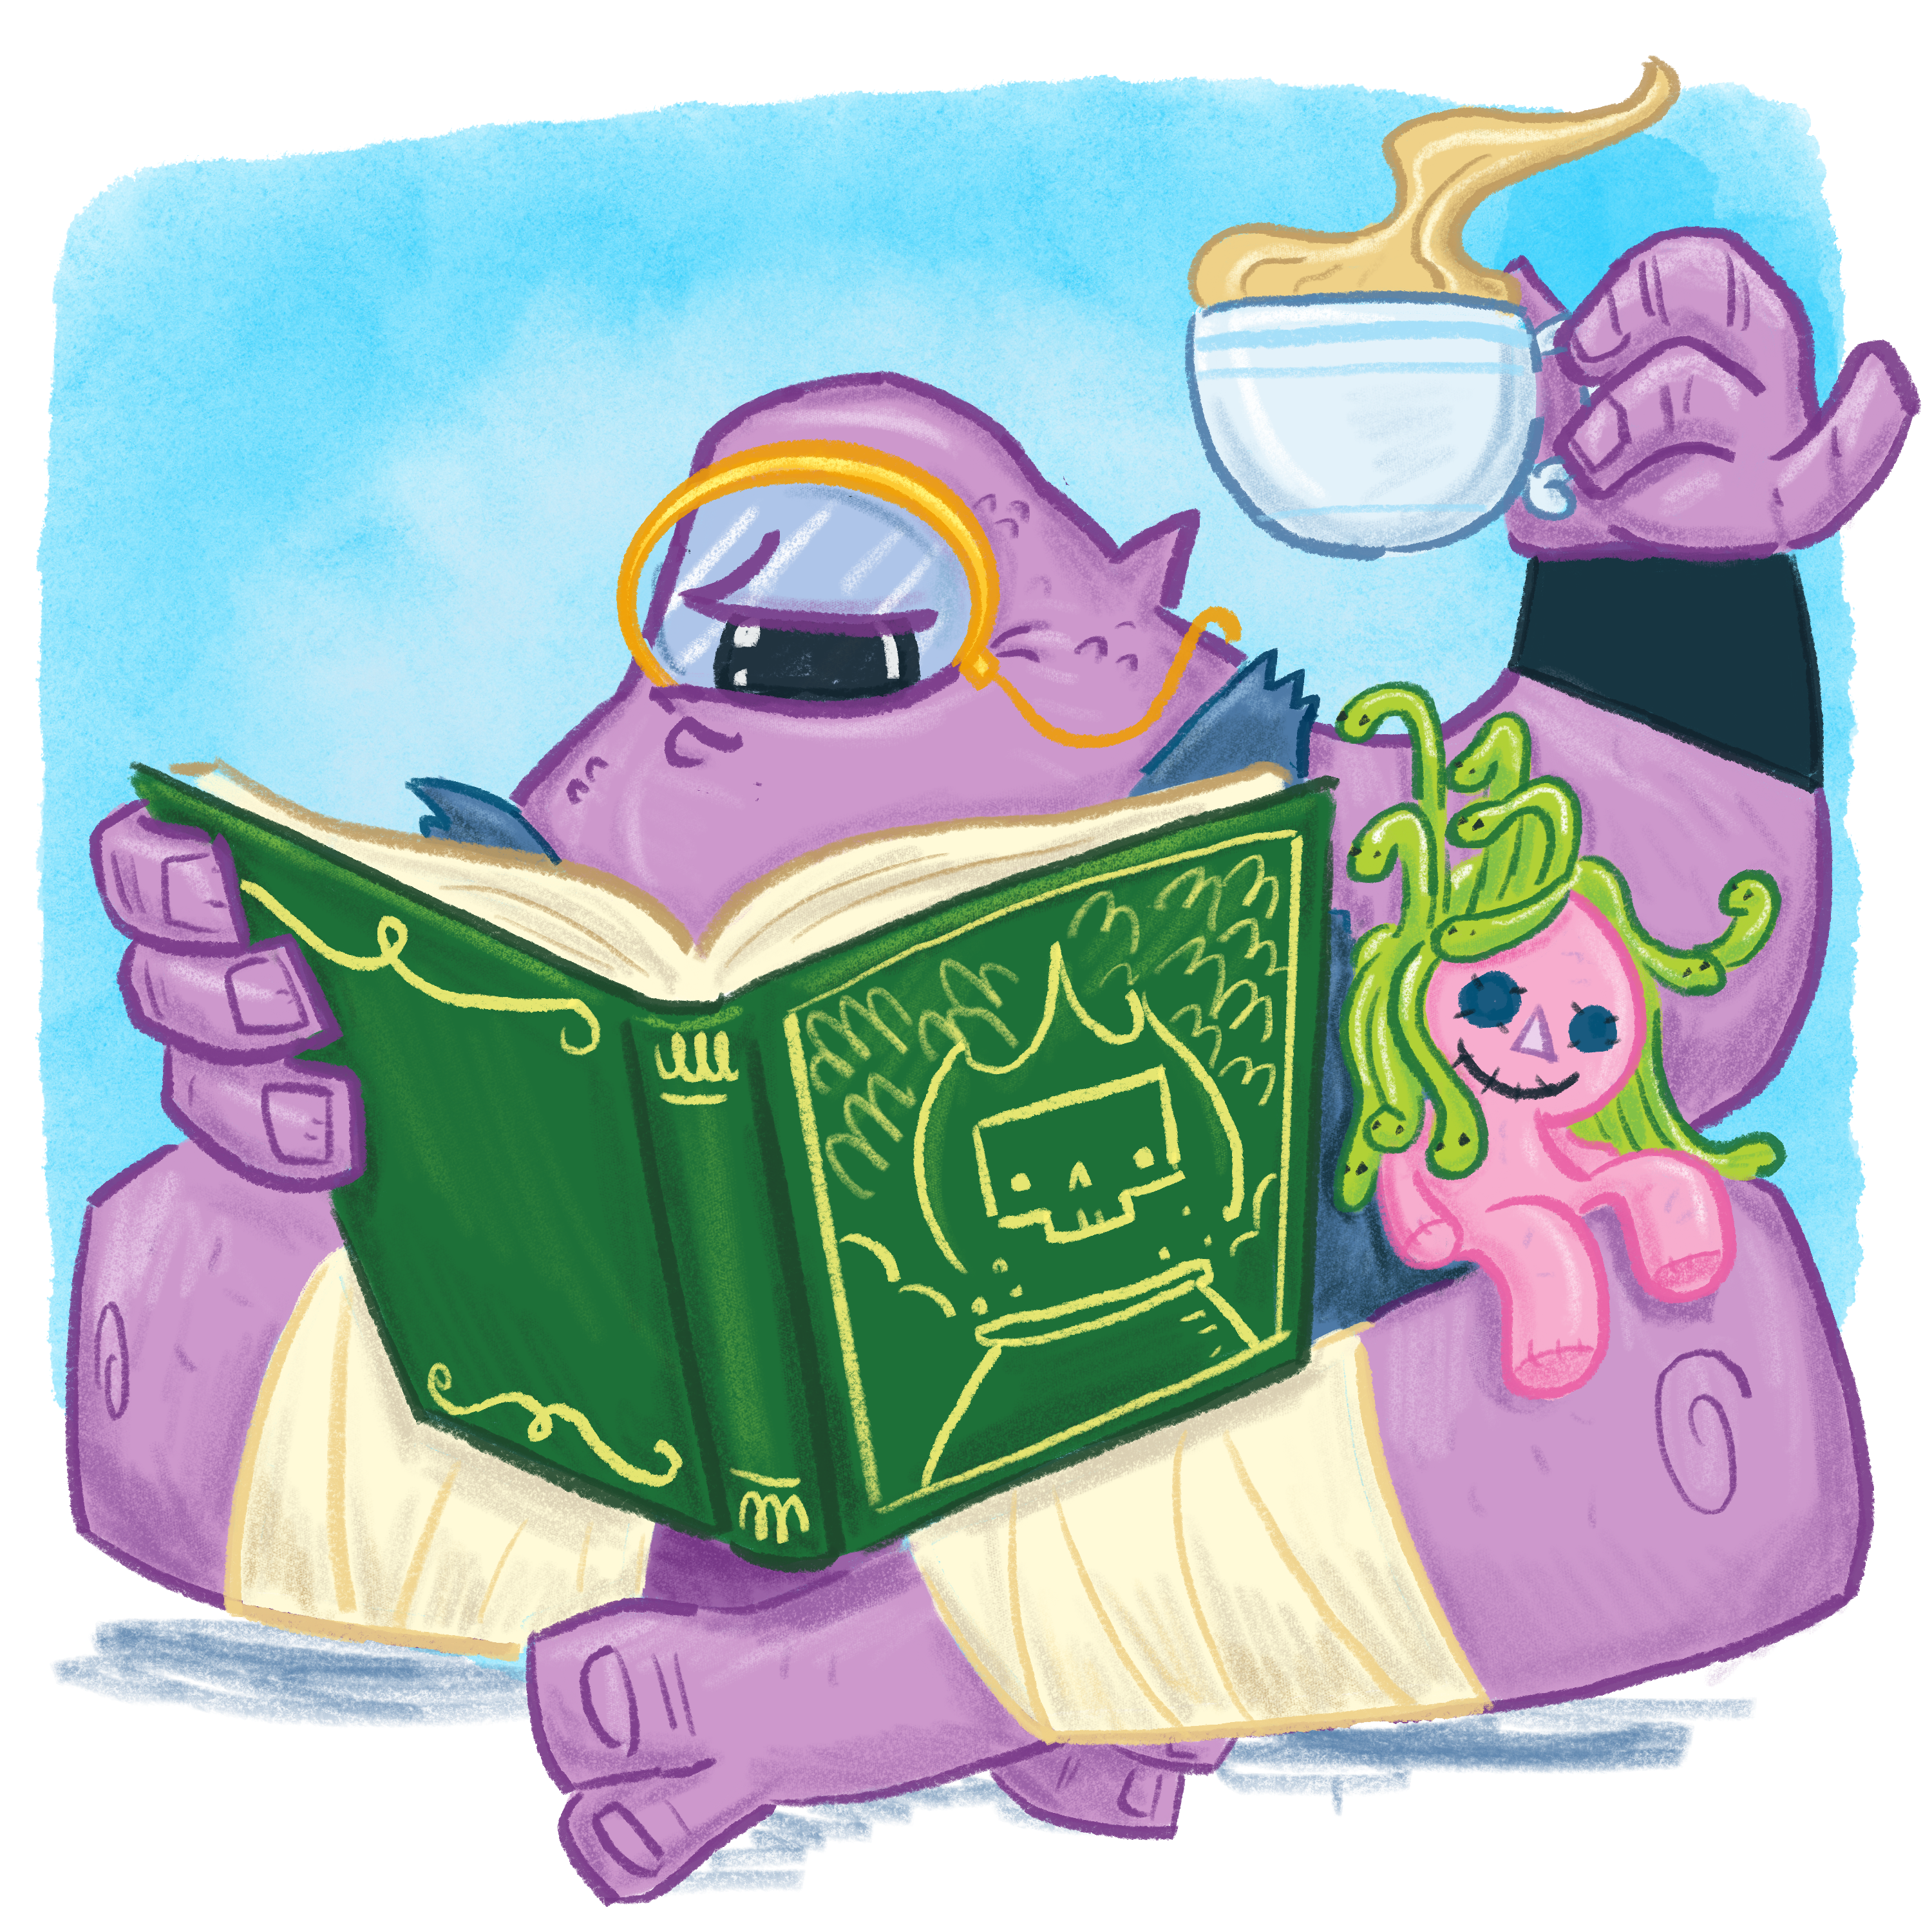 cartoon monster reading a book with a stuffed animal and a cup of tea